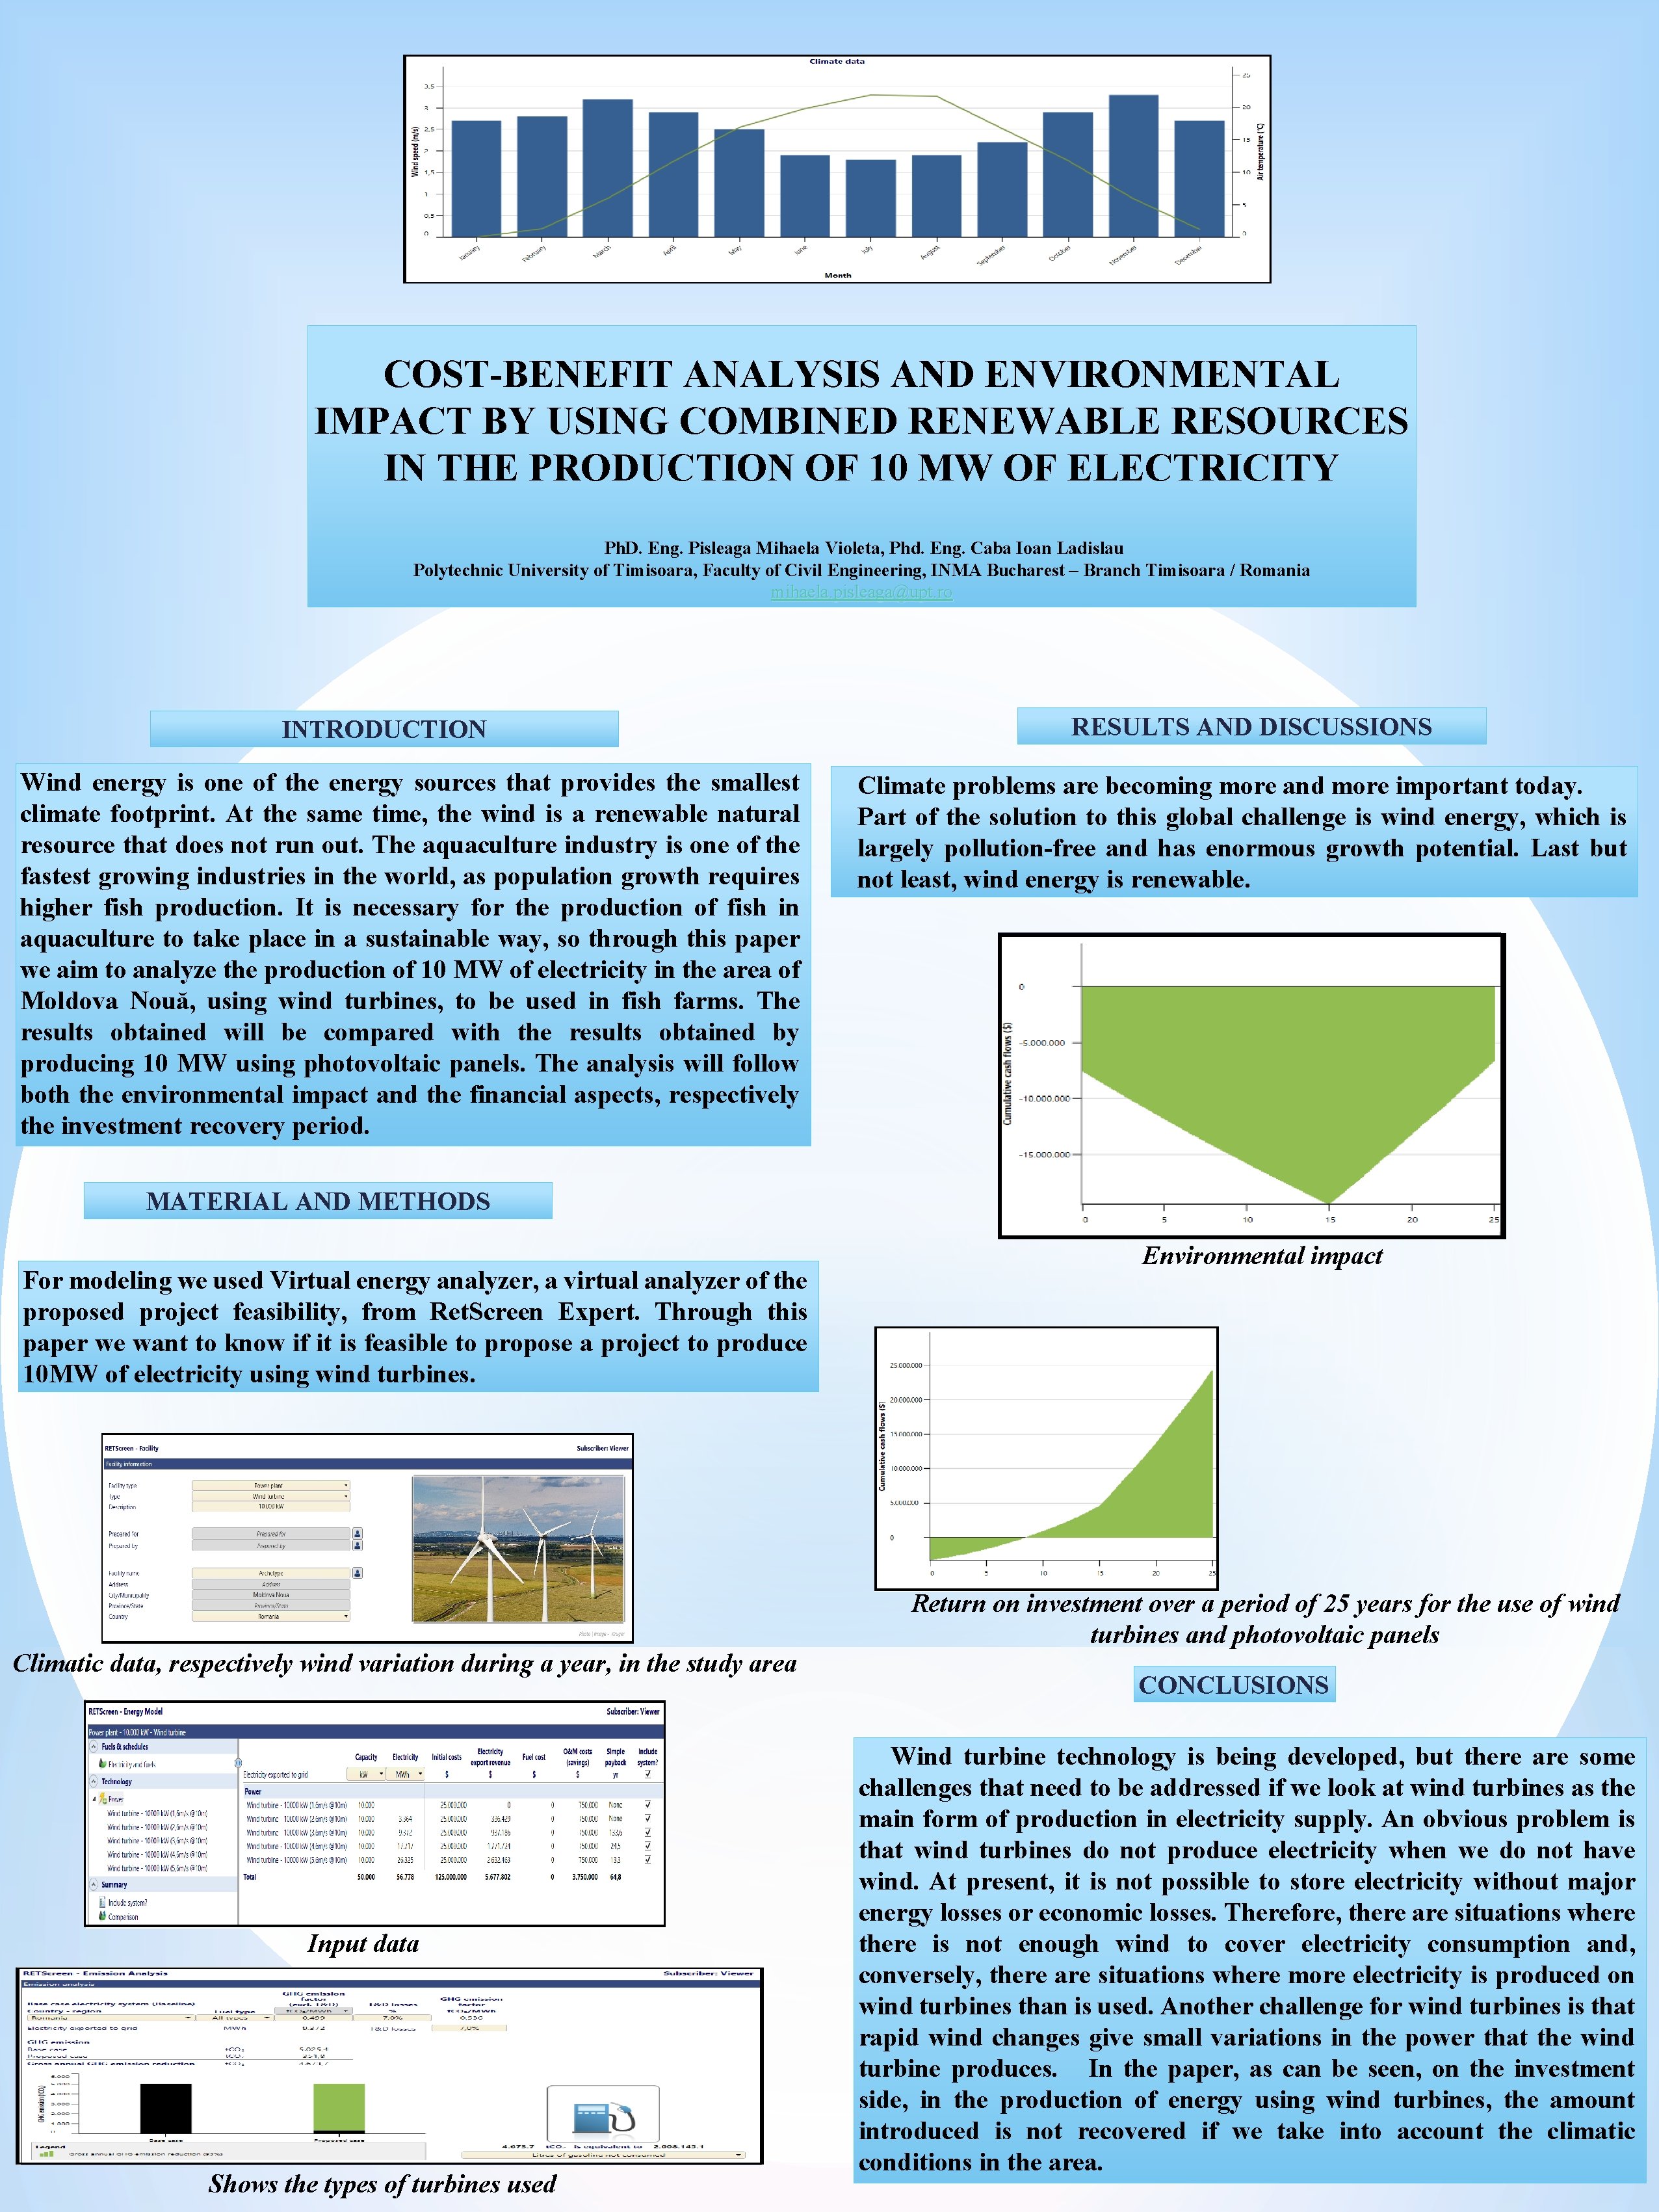 COST-BENEFIT ANALYSIS AND ENVIRONMENTAL IMPACT BY USING COMBINED RENEWABLE RESOURCES IN THE PRODUCTION OF